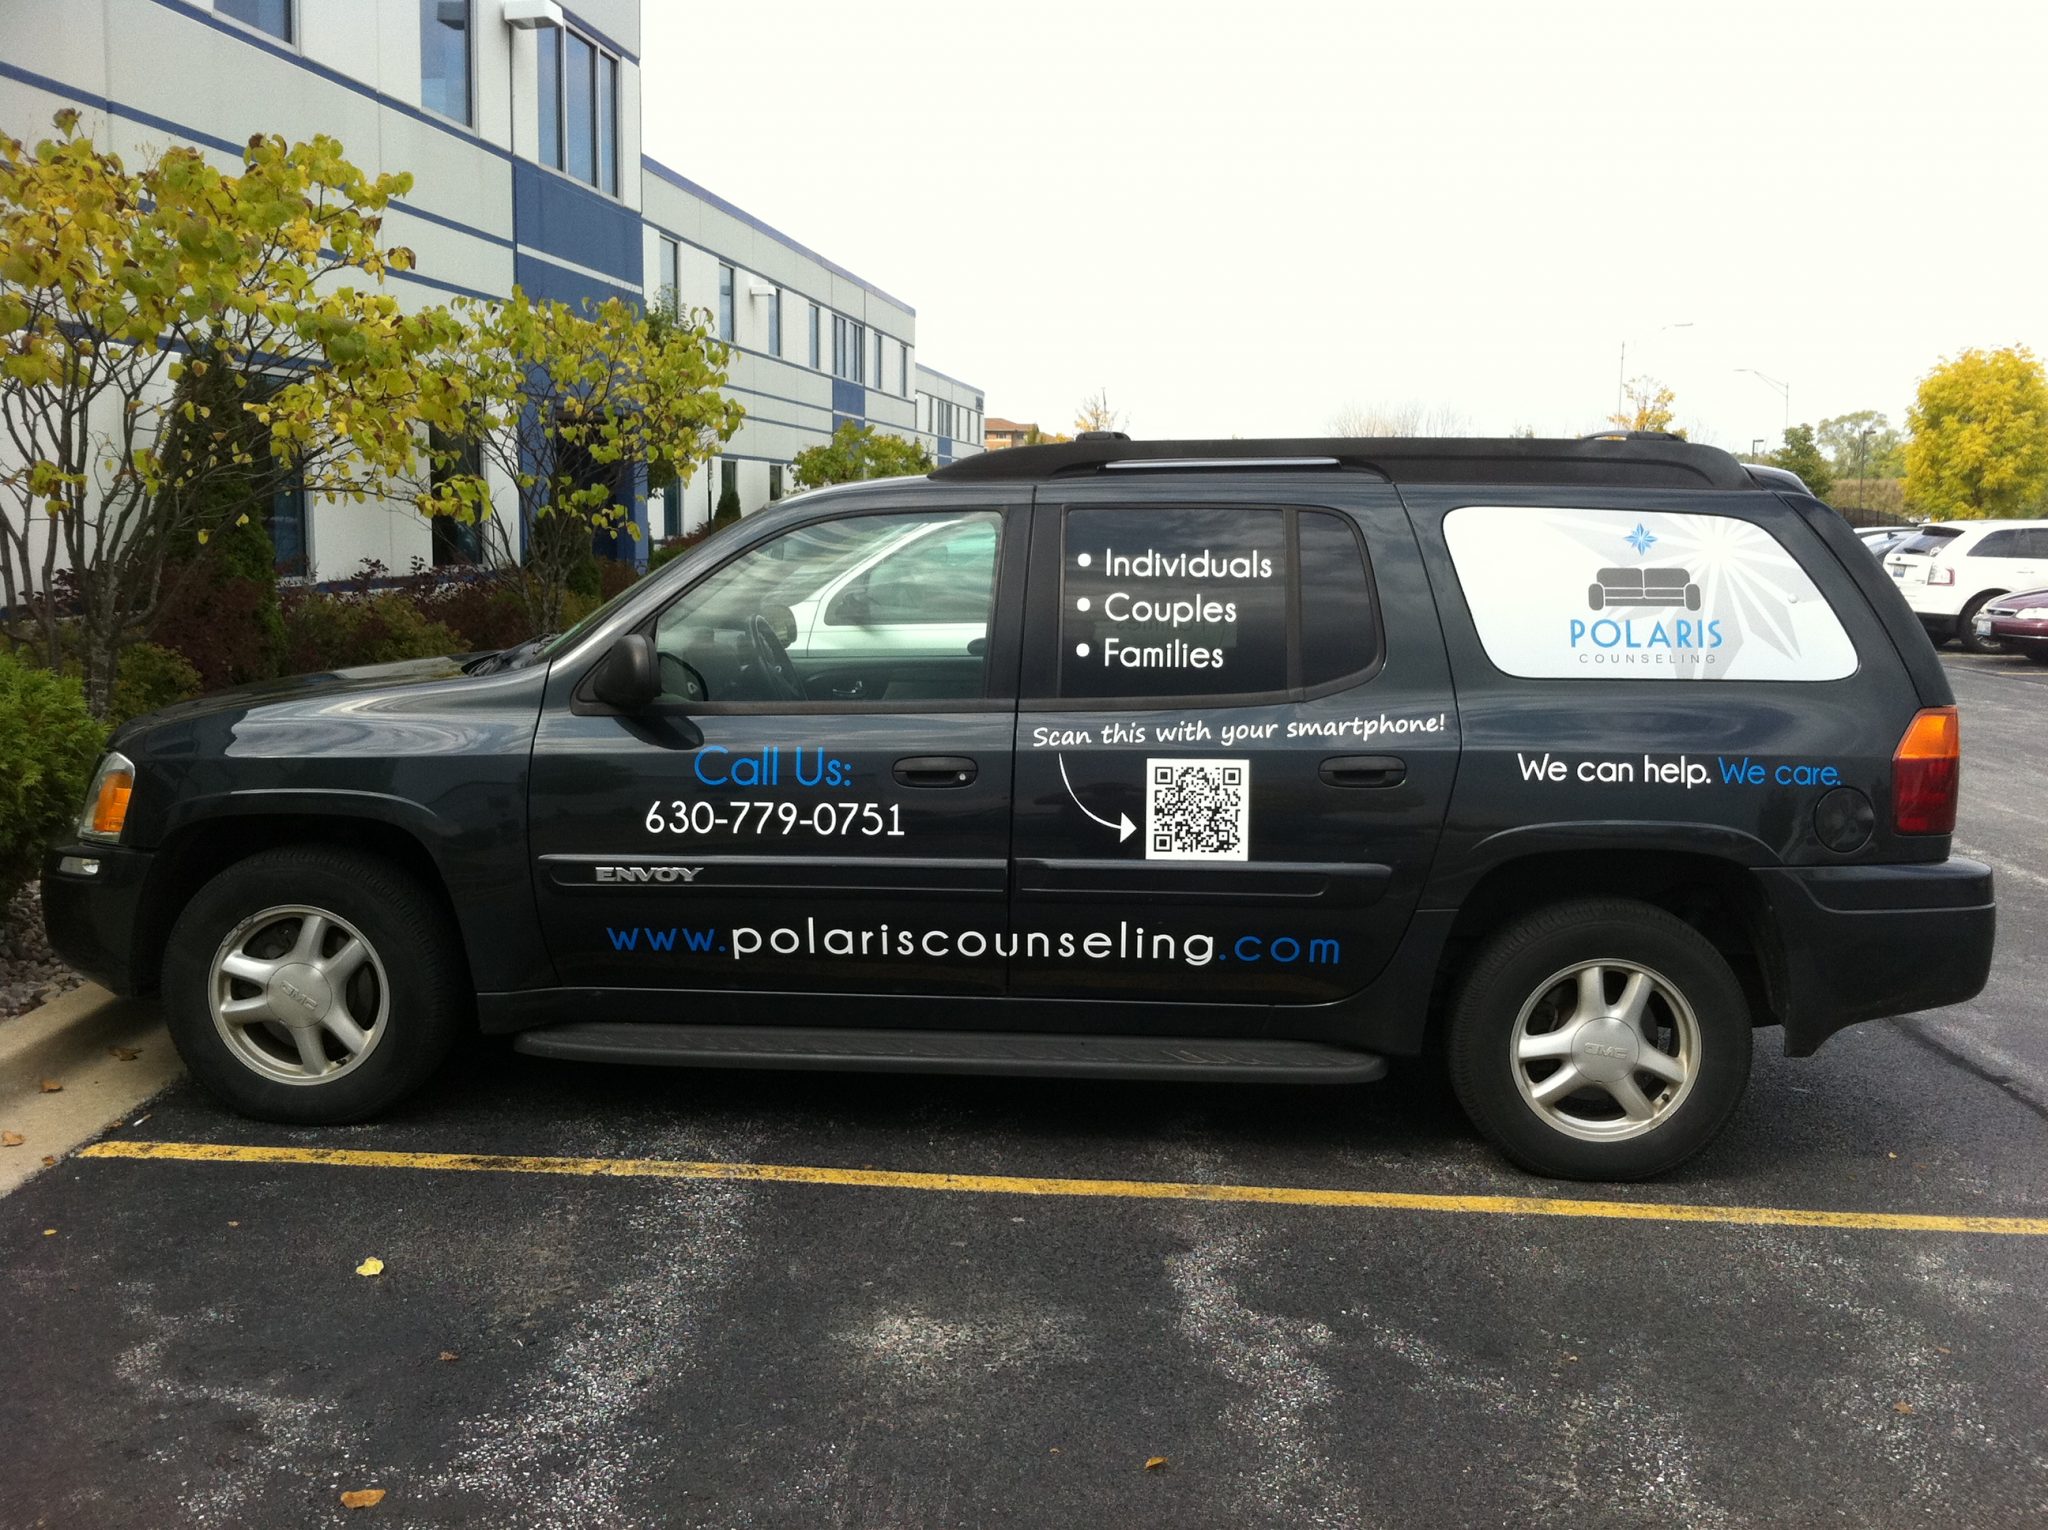 Our Newly Branded Car!